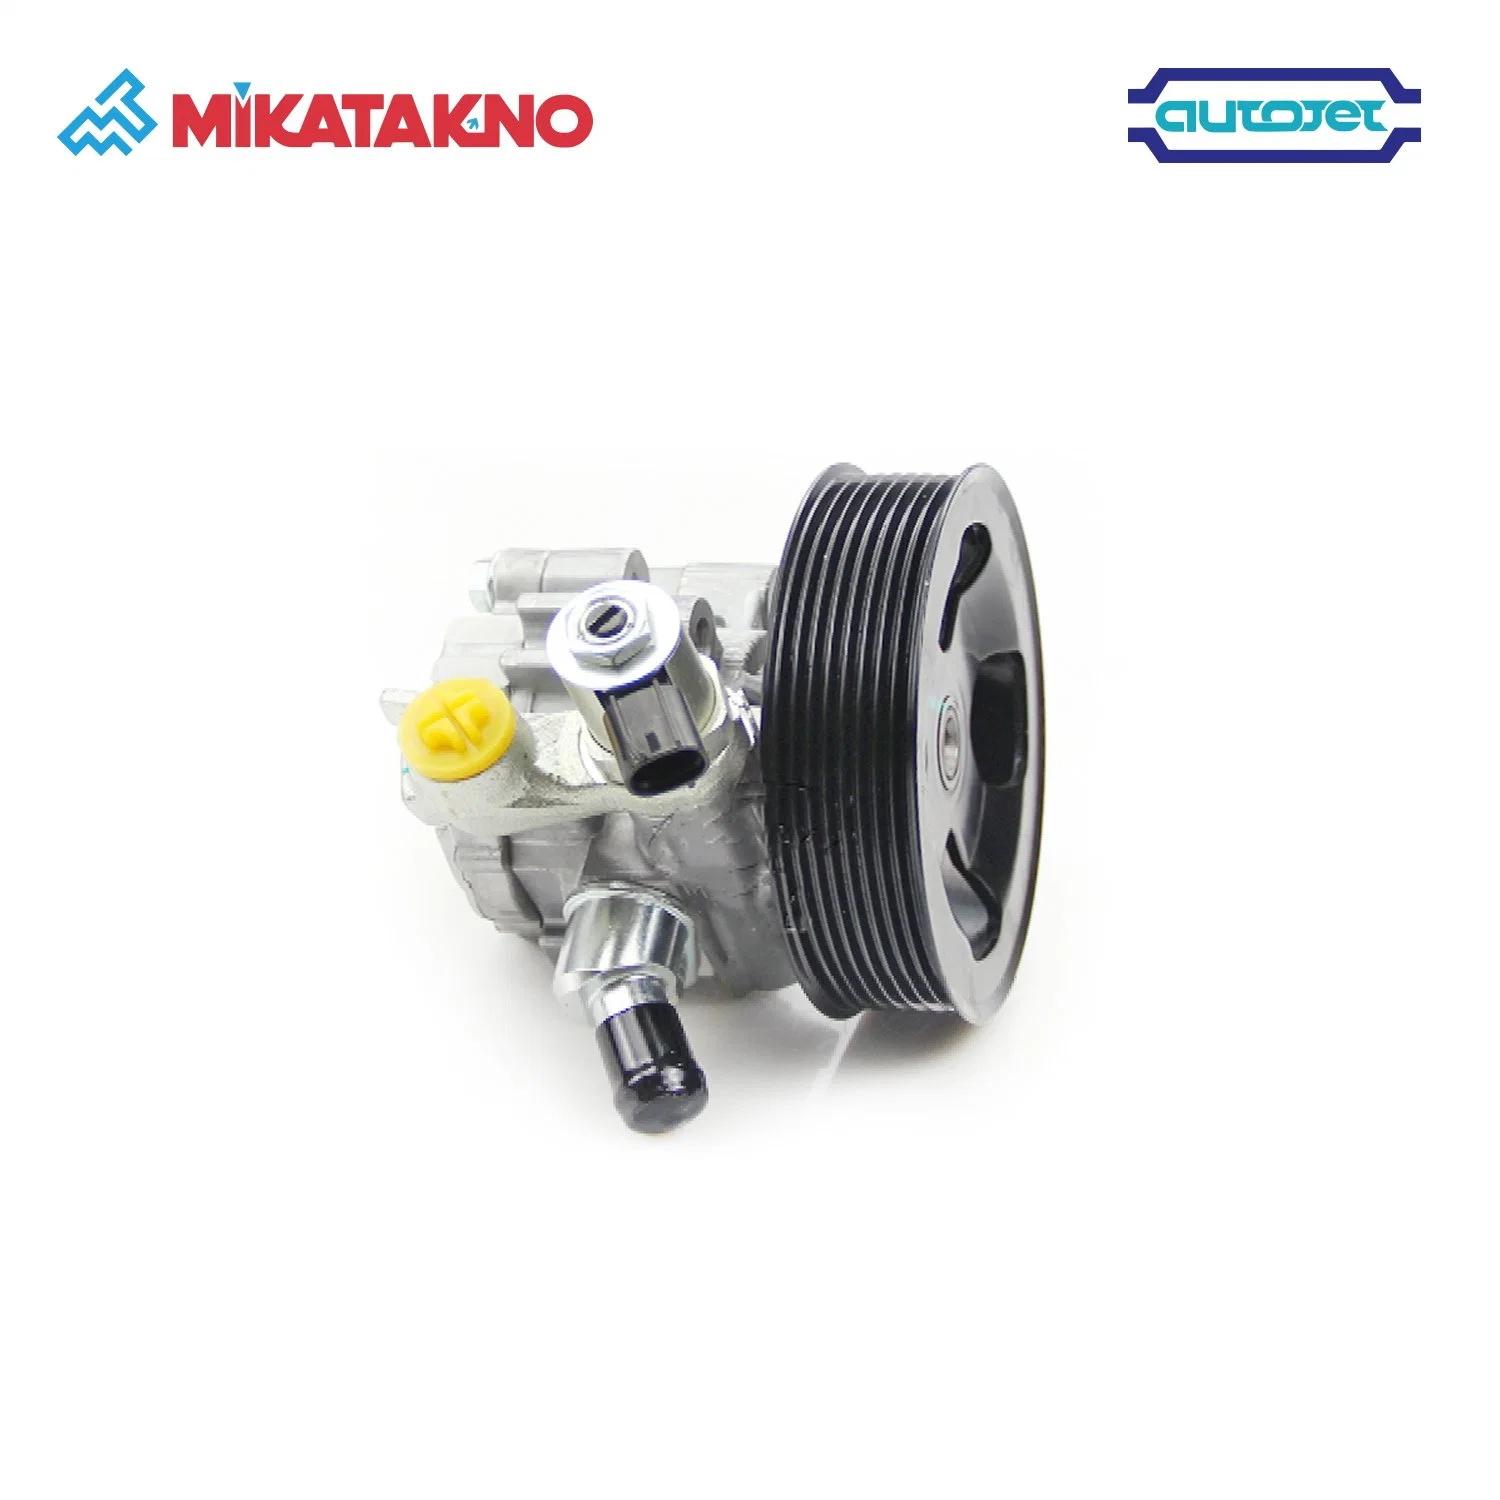 Power Steering Pump OEM 44310-0c110 Sequoia Tundra Auto Steering System for Toyota High Quality with Best Supplier